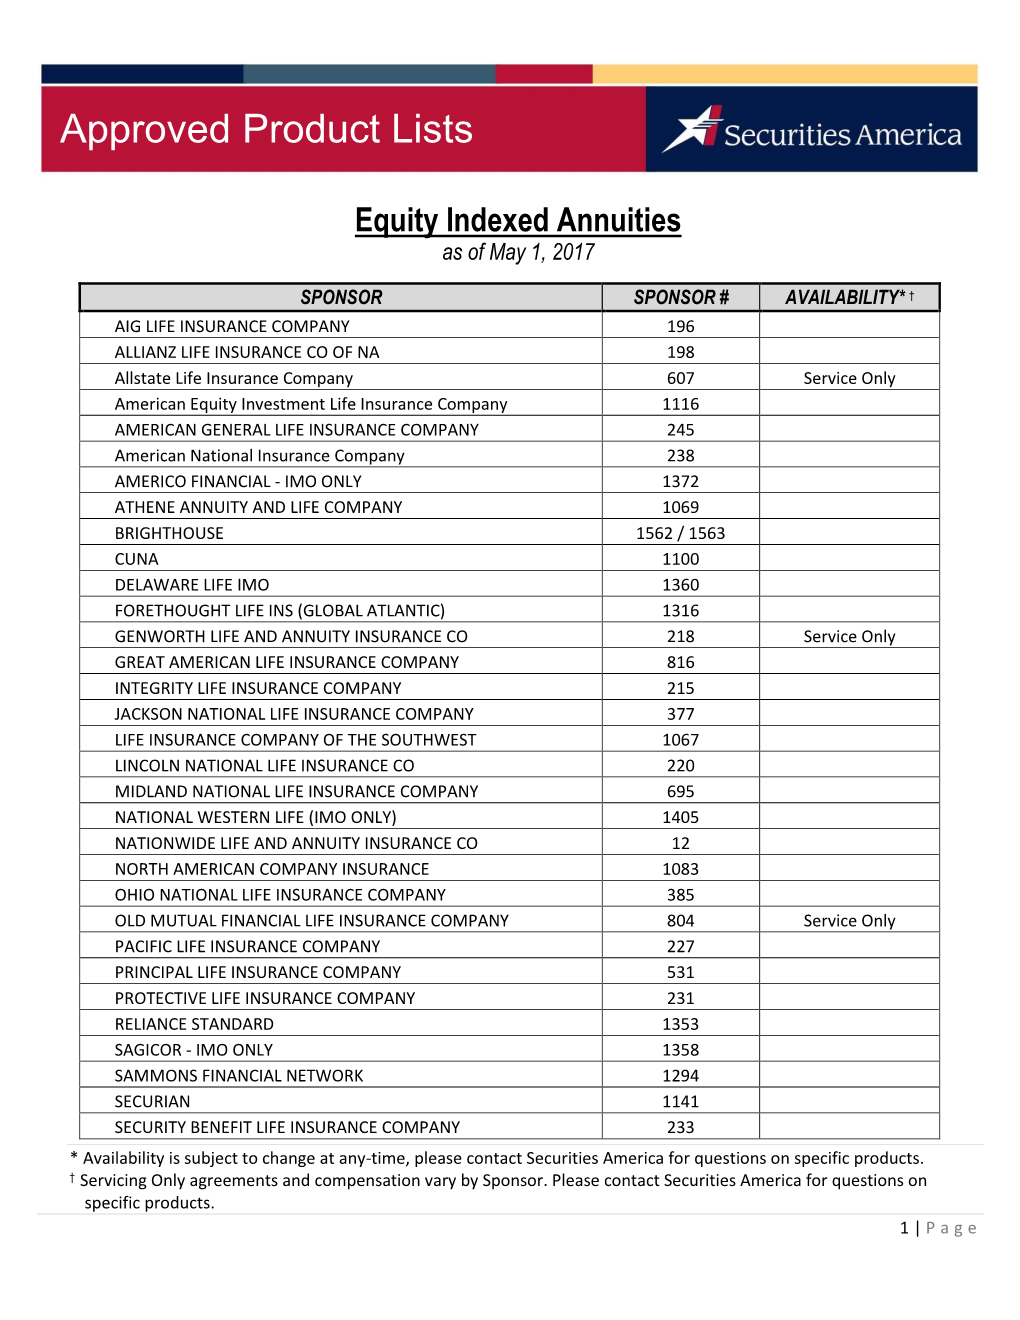 Equity Indexed Annuities As of May 1, 2017